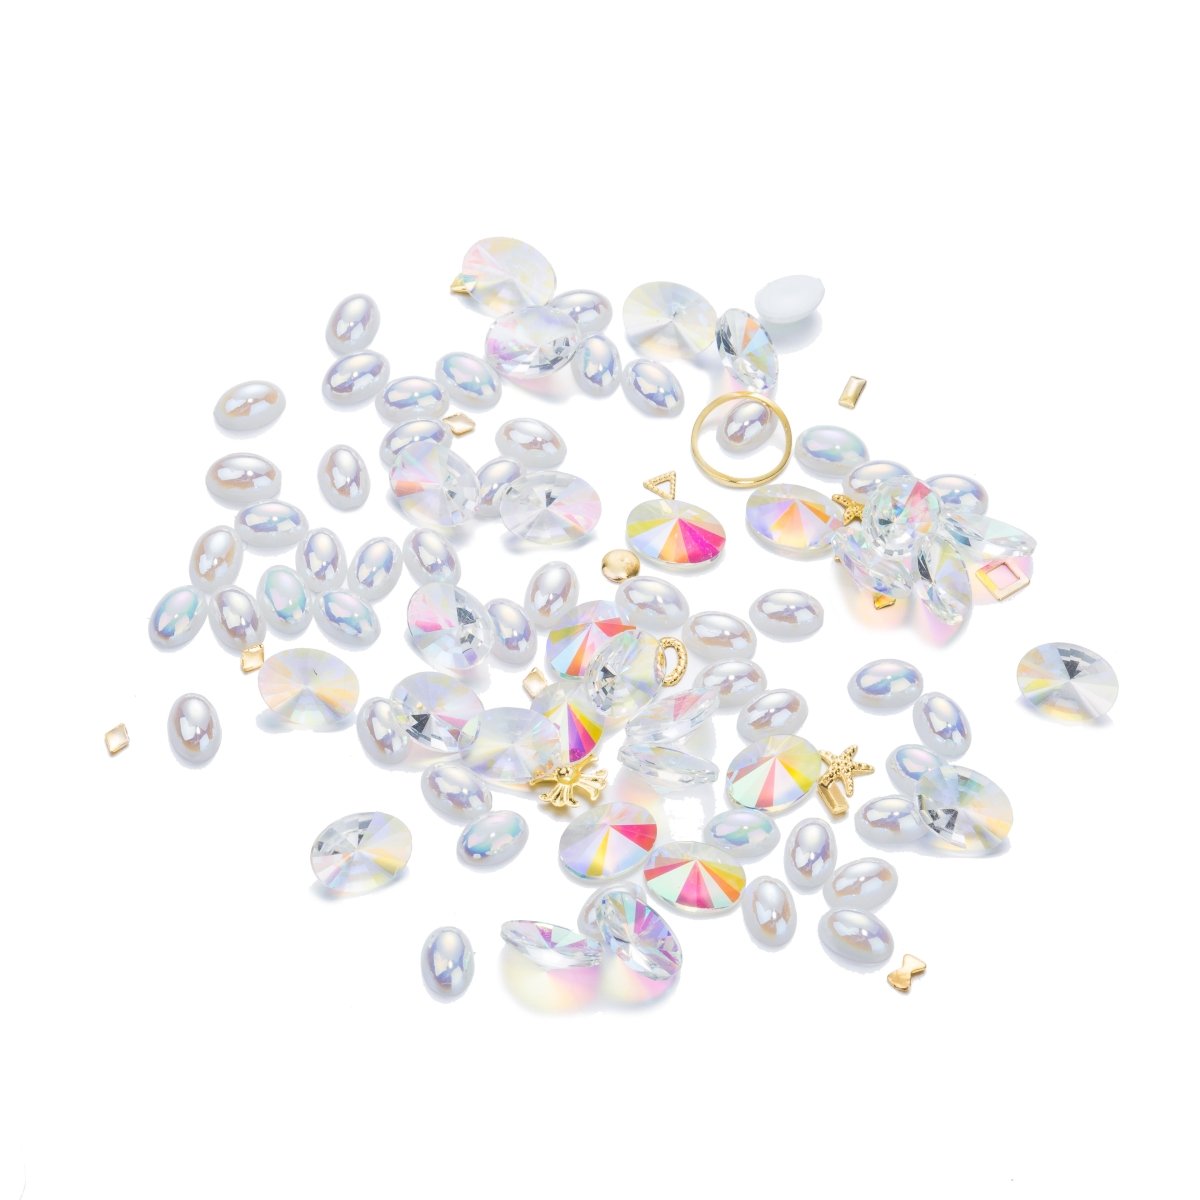 Mixed Crystal and Water Pearl - Oval Cut Crystal AB size 6 mm and Water Pearl Flatback size 6 mm - DLUXCA